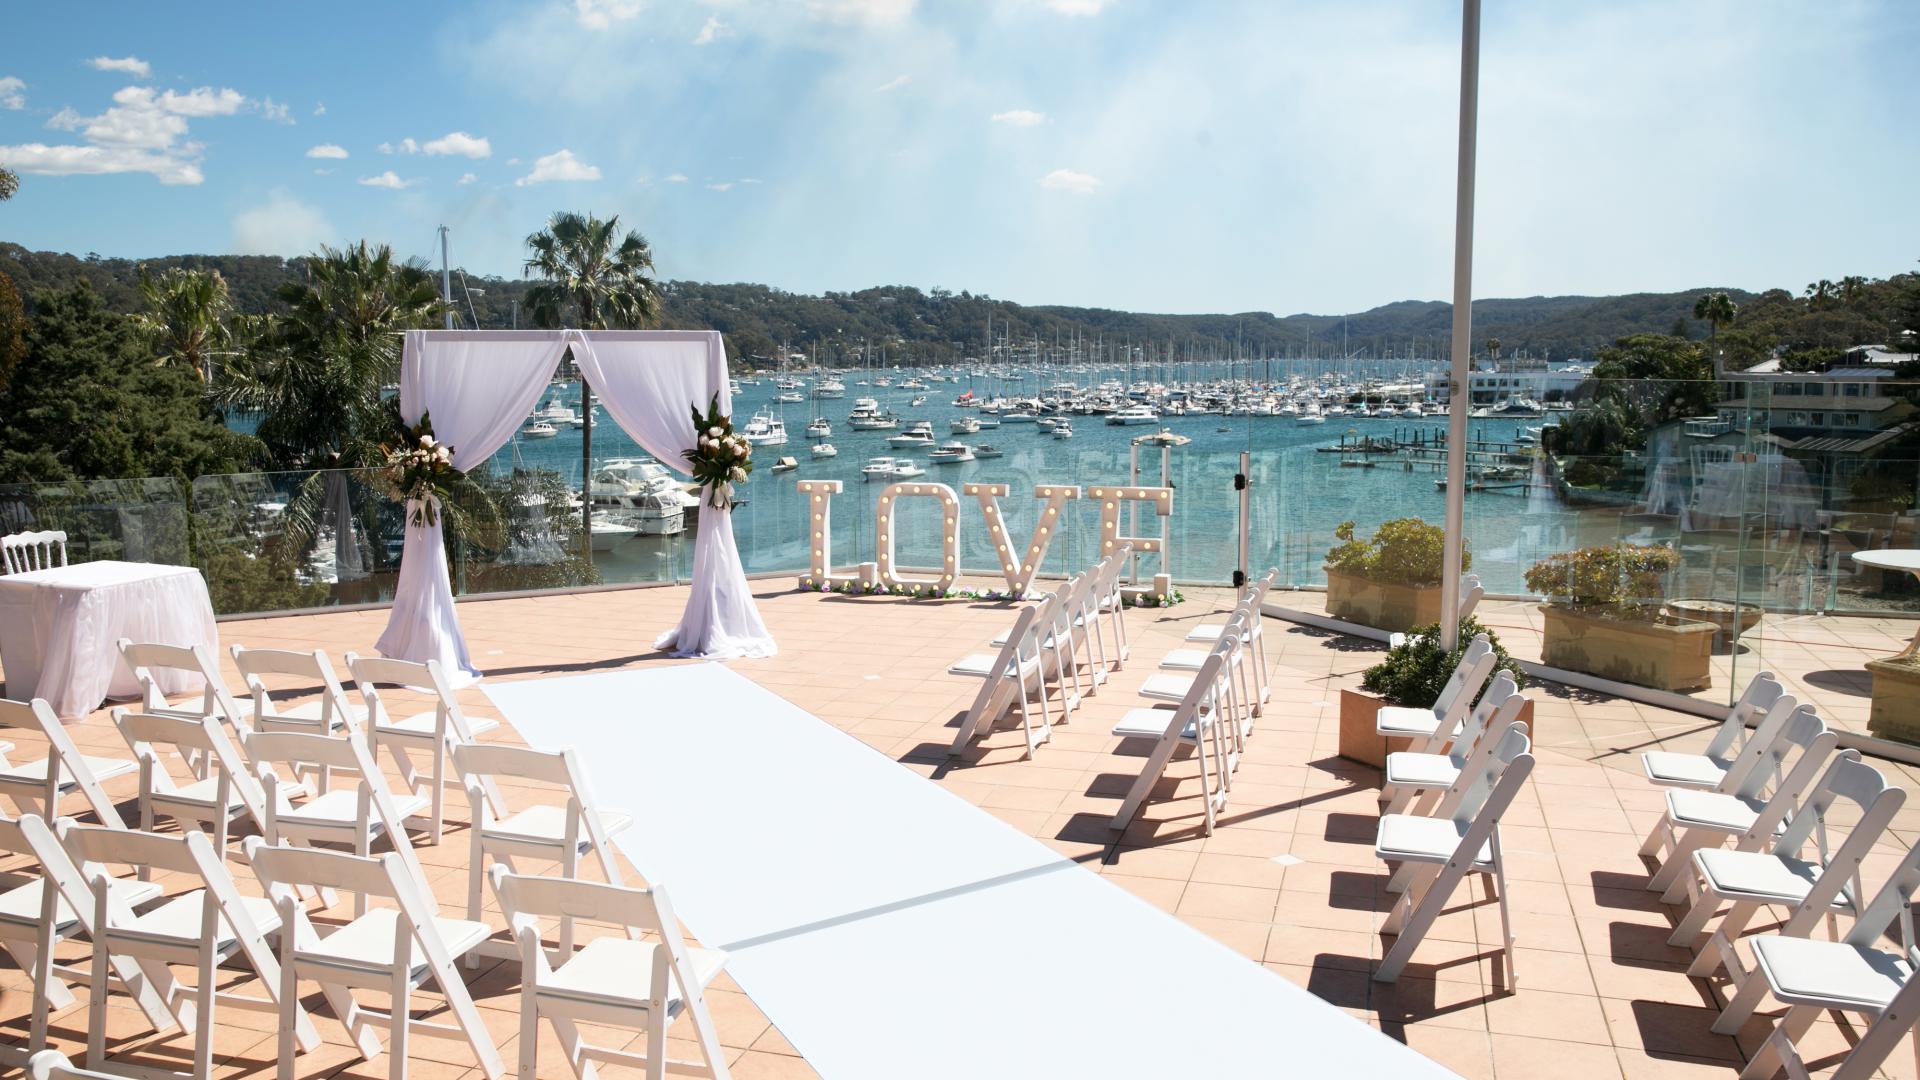 Event Venues for Hire in the Northern Beaches, Sydney